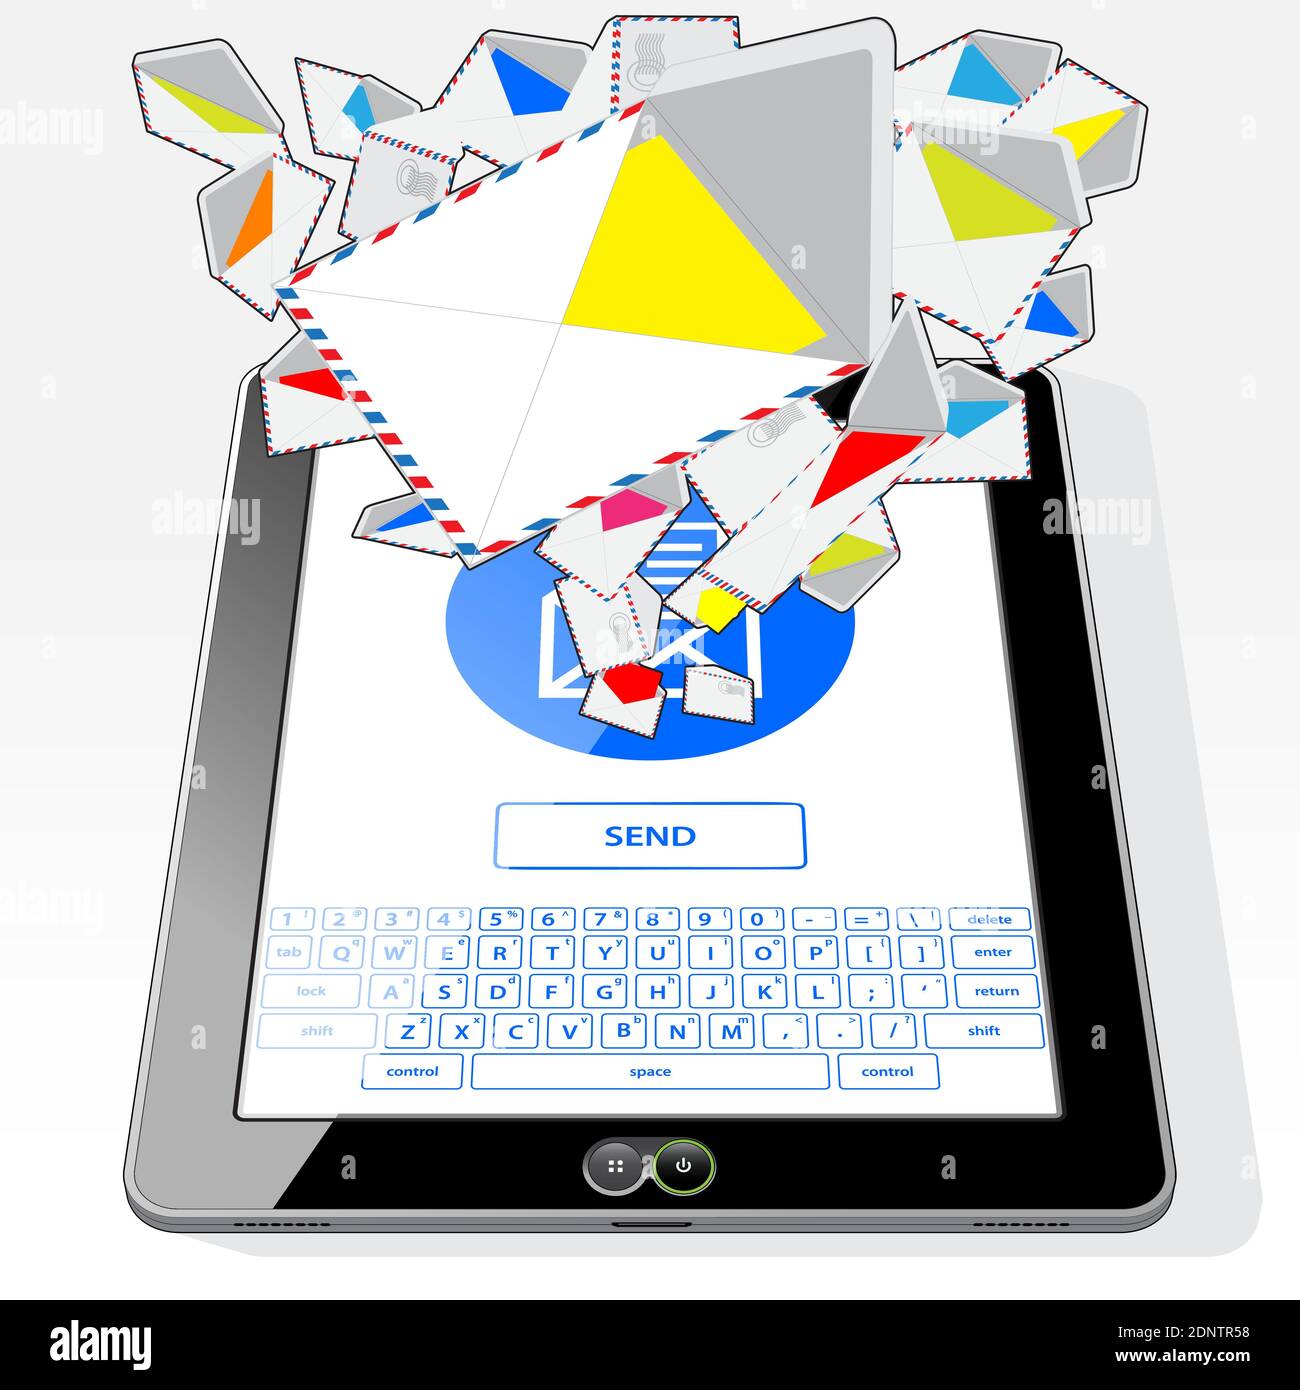 A Tablet Computer with touchscreen keyboard, sending and receiving electronic mail. A stream of emails are randomly emitting from its screen. Stock Vector